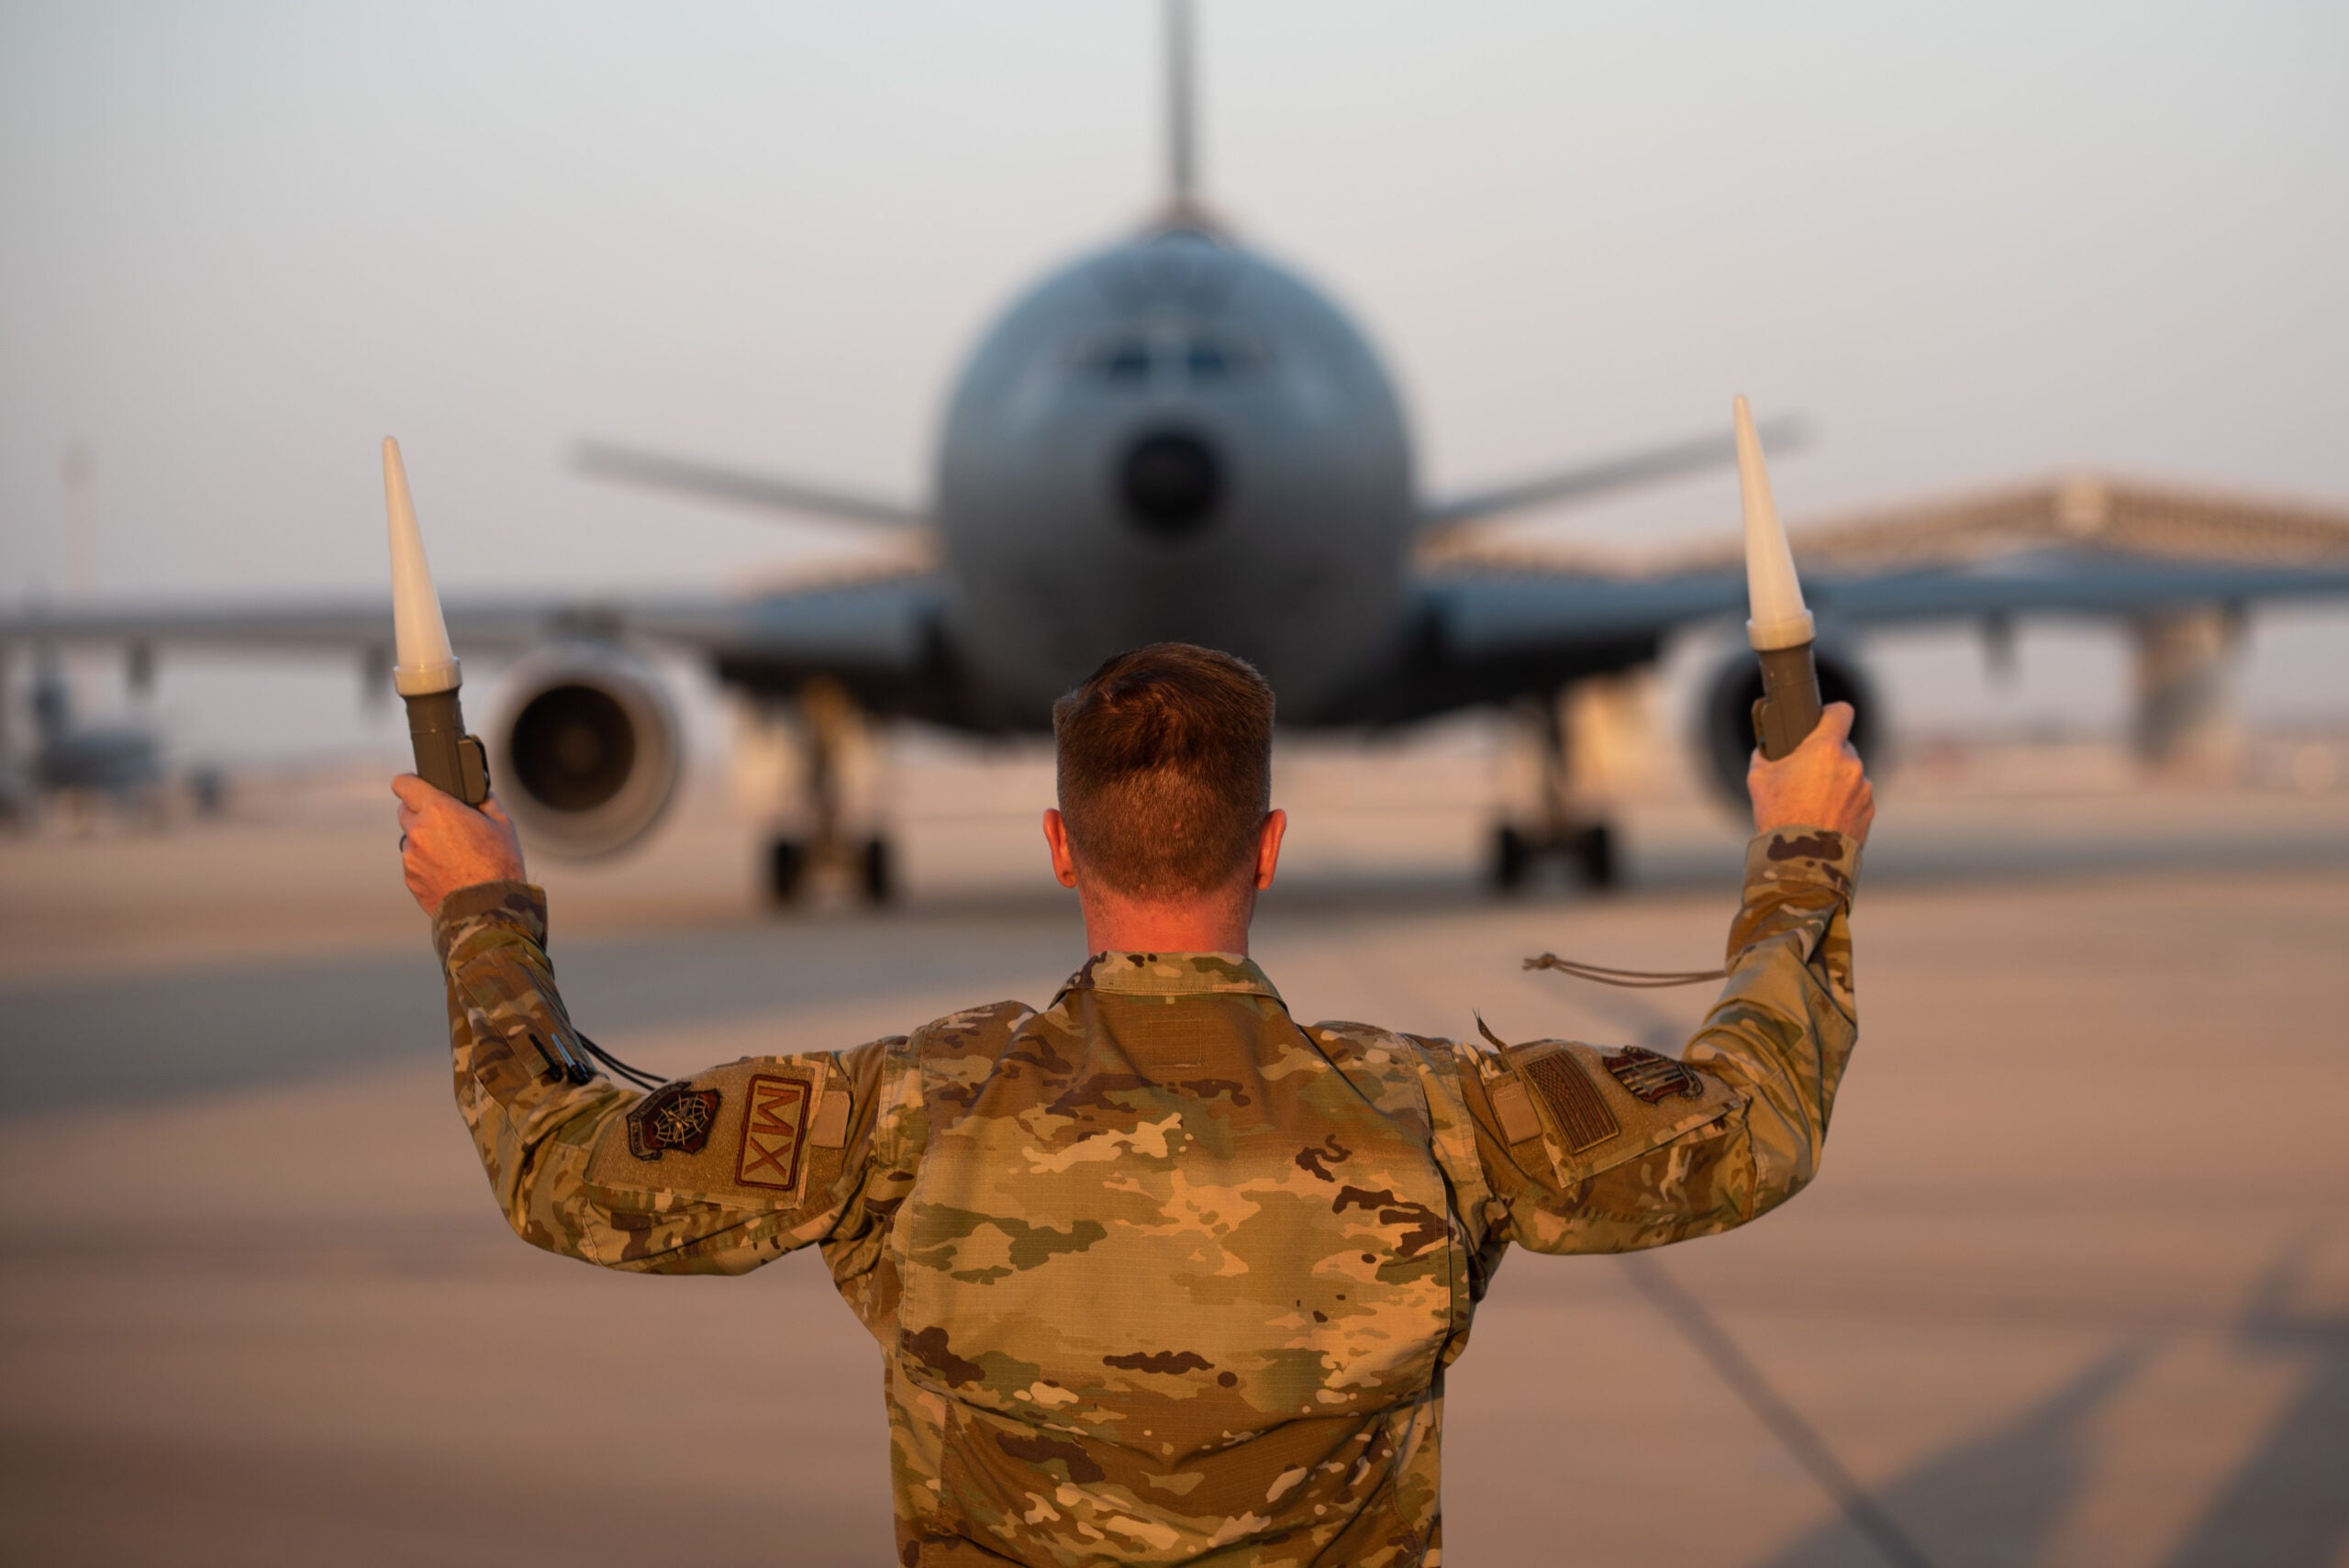 U.S. Air Force Col. Clinton Varty, 60th Maintenance Group commander, taxi's out the last KC-10 at Prince Sultan Air Base (PSAB), Kingdom of Saudi Arabia, Oct. 5, 2023. The departure of the KC-10 at PSAB marked the end of the airframe's over 30 years of service within the U.S. Air Forces Central (AFCENT) Area of Responsibility. By September 2024, the U.S. Air Force's fleet of KC-10s will be decommissioned and gradually replaced by the KC-46 aircraft. (U.S. Air Force photo by Tech. Sgt. Alexander Frank)